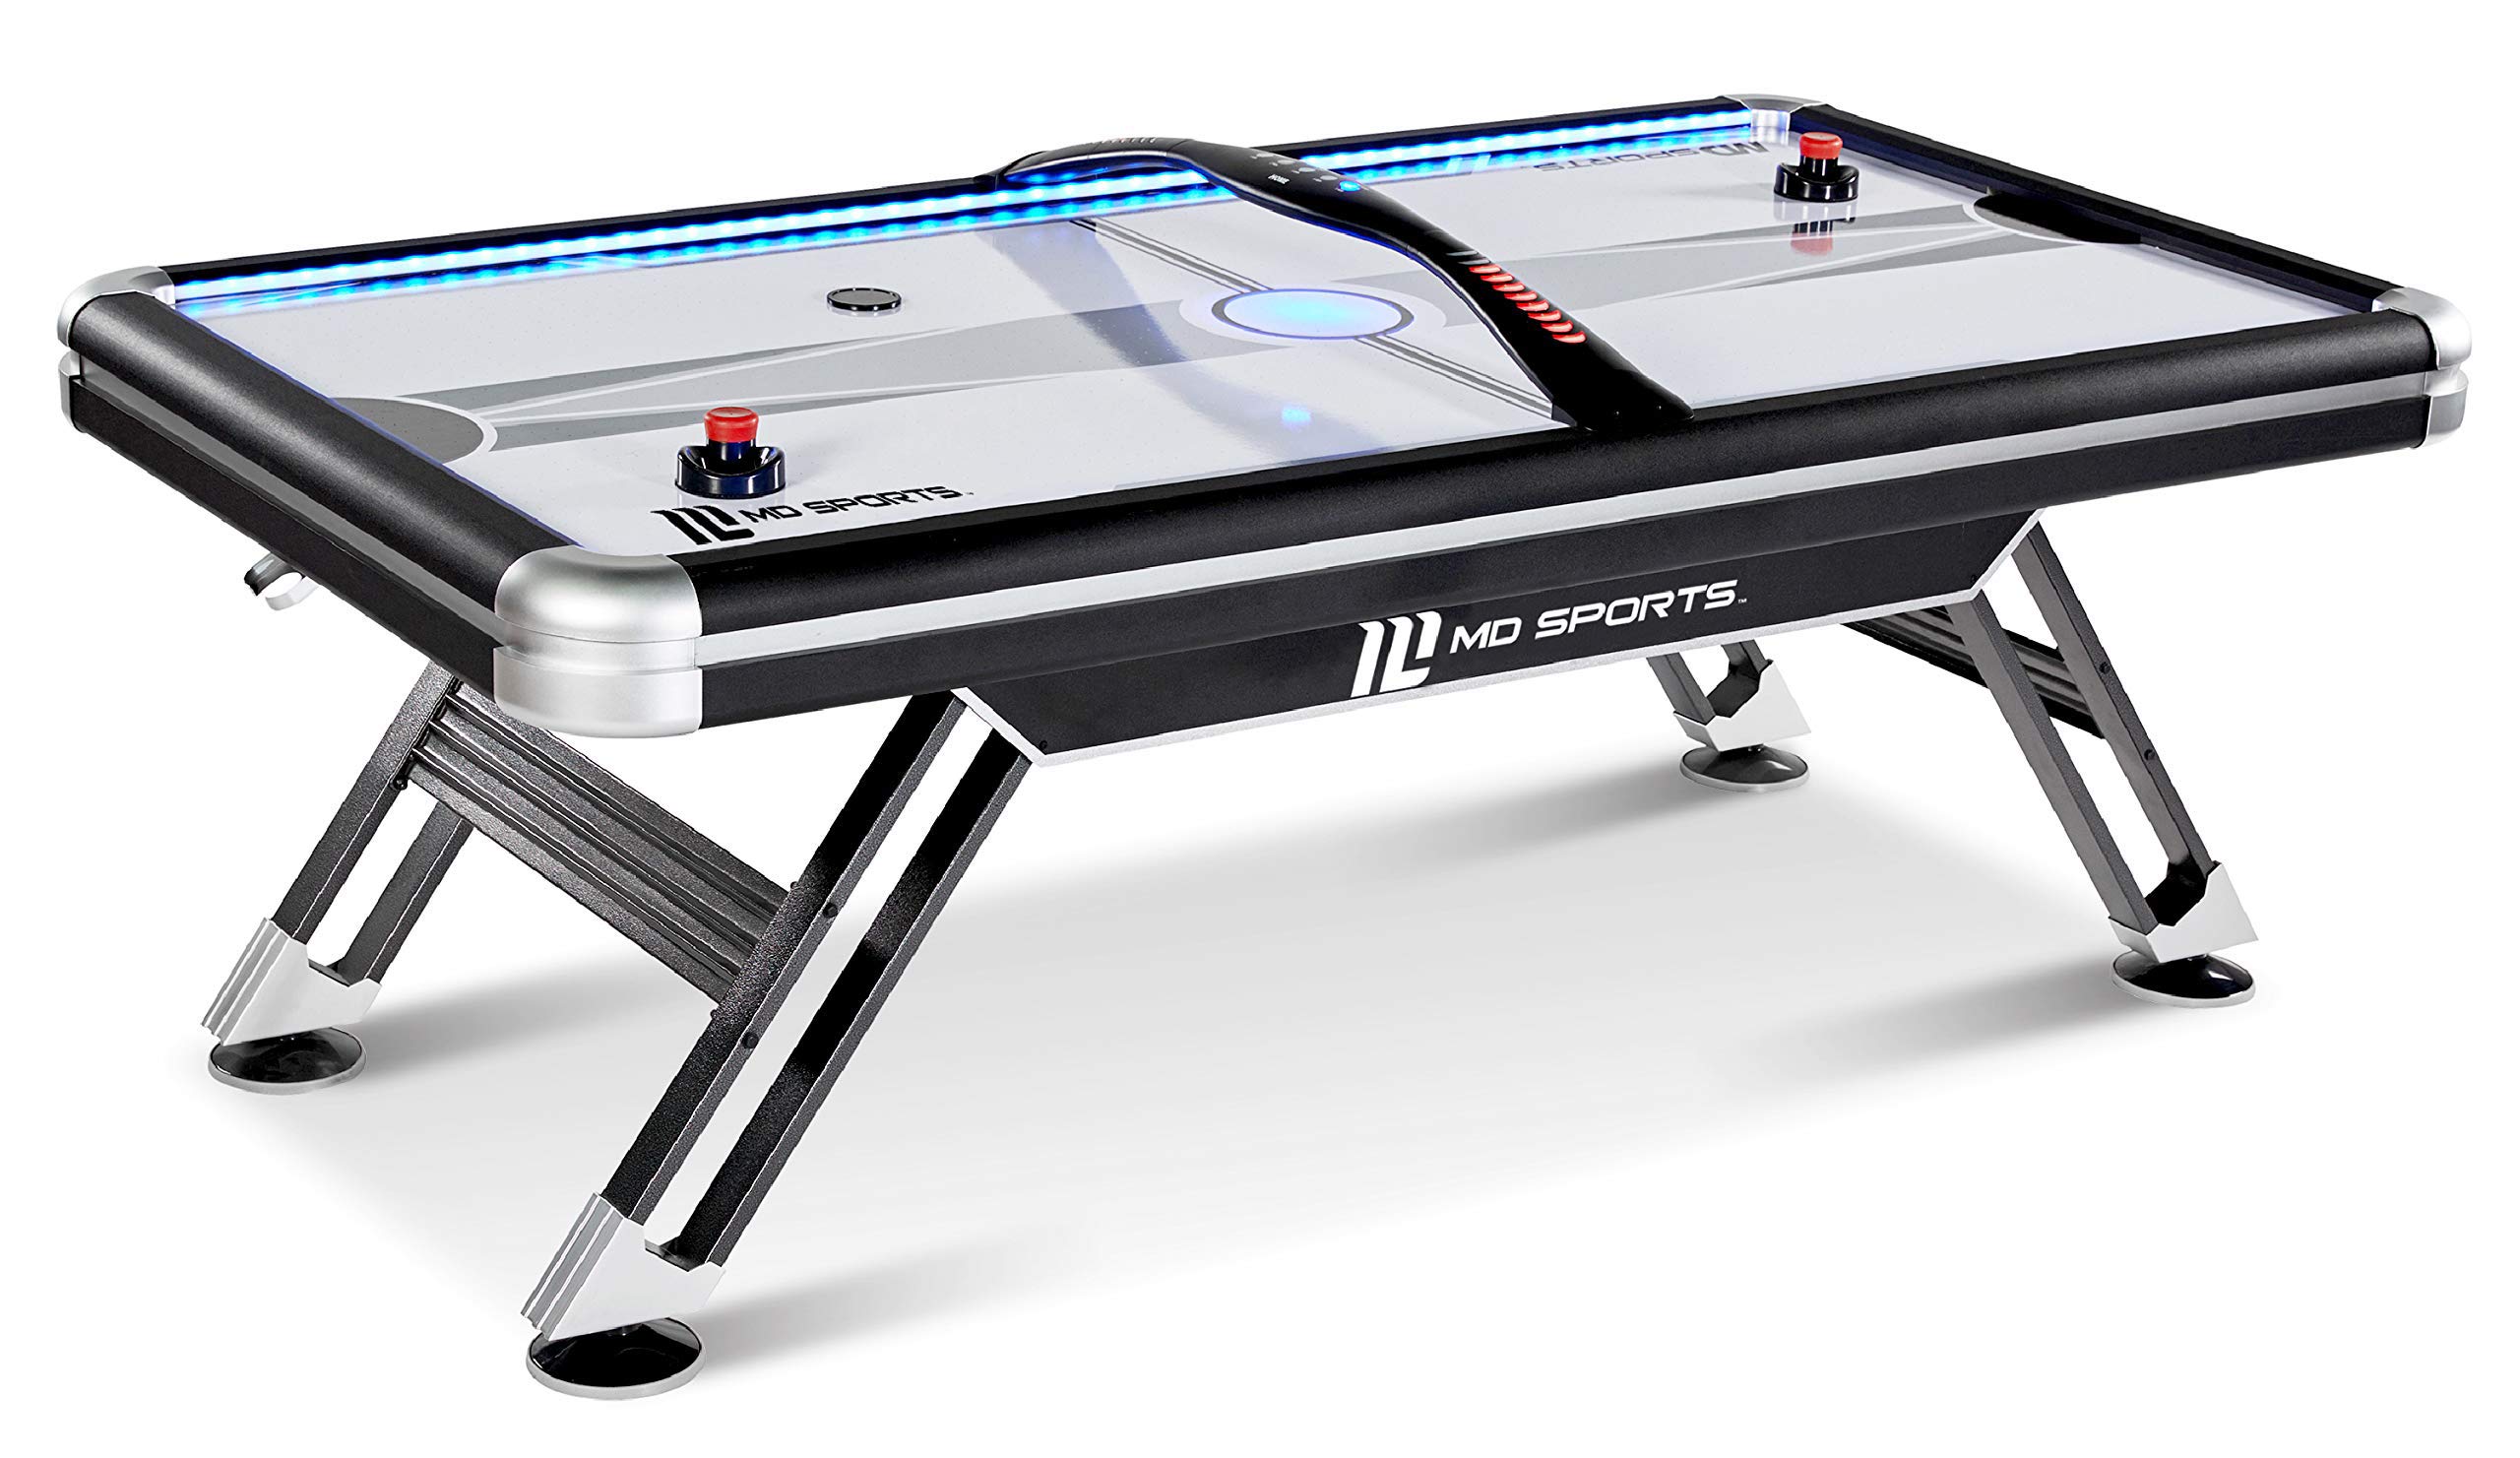 MD SPORTS Titan 75 ft Air Powered Hockey Table with Overhead Scorer